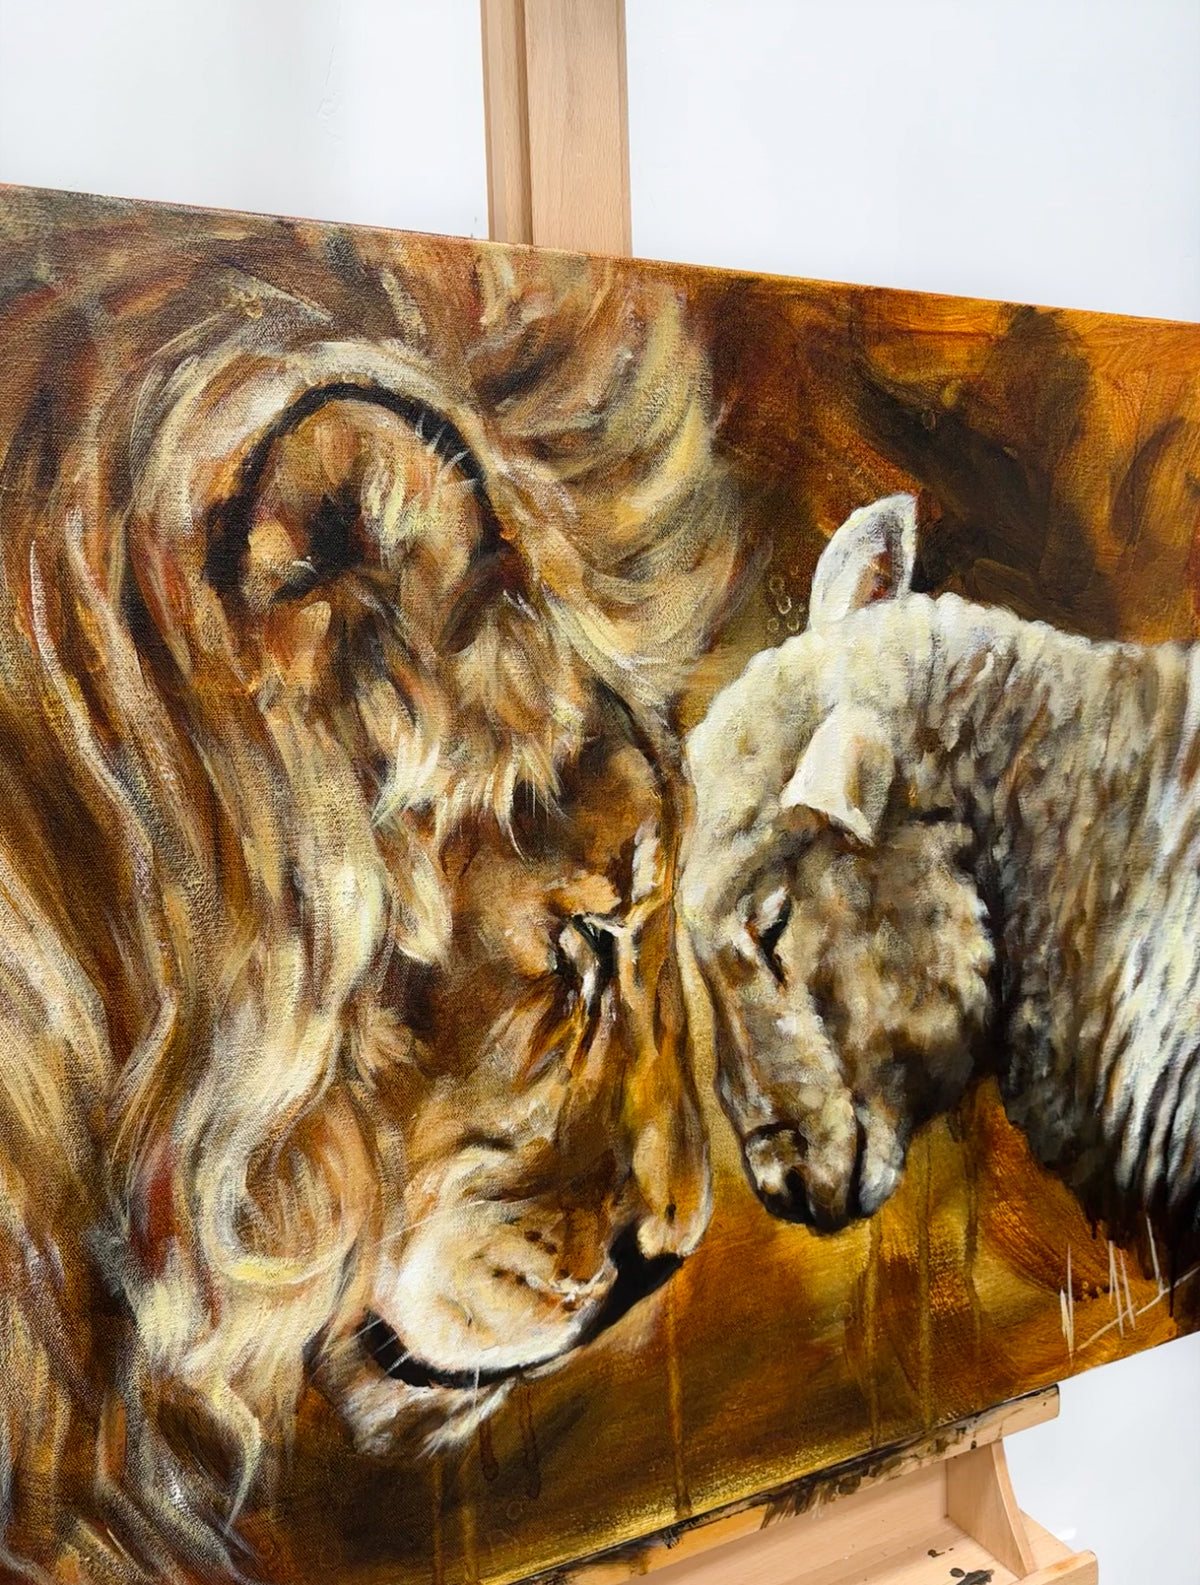 Compassion of a King - 24”x30” Original Acrylic Painting